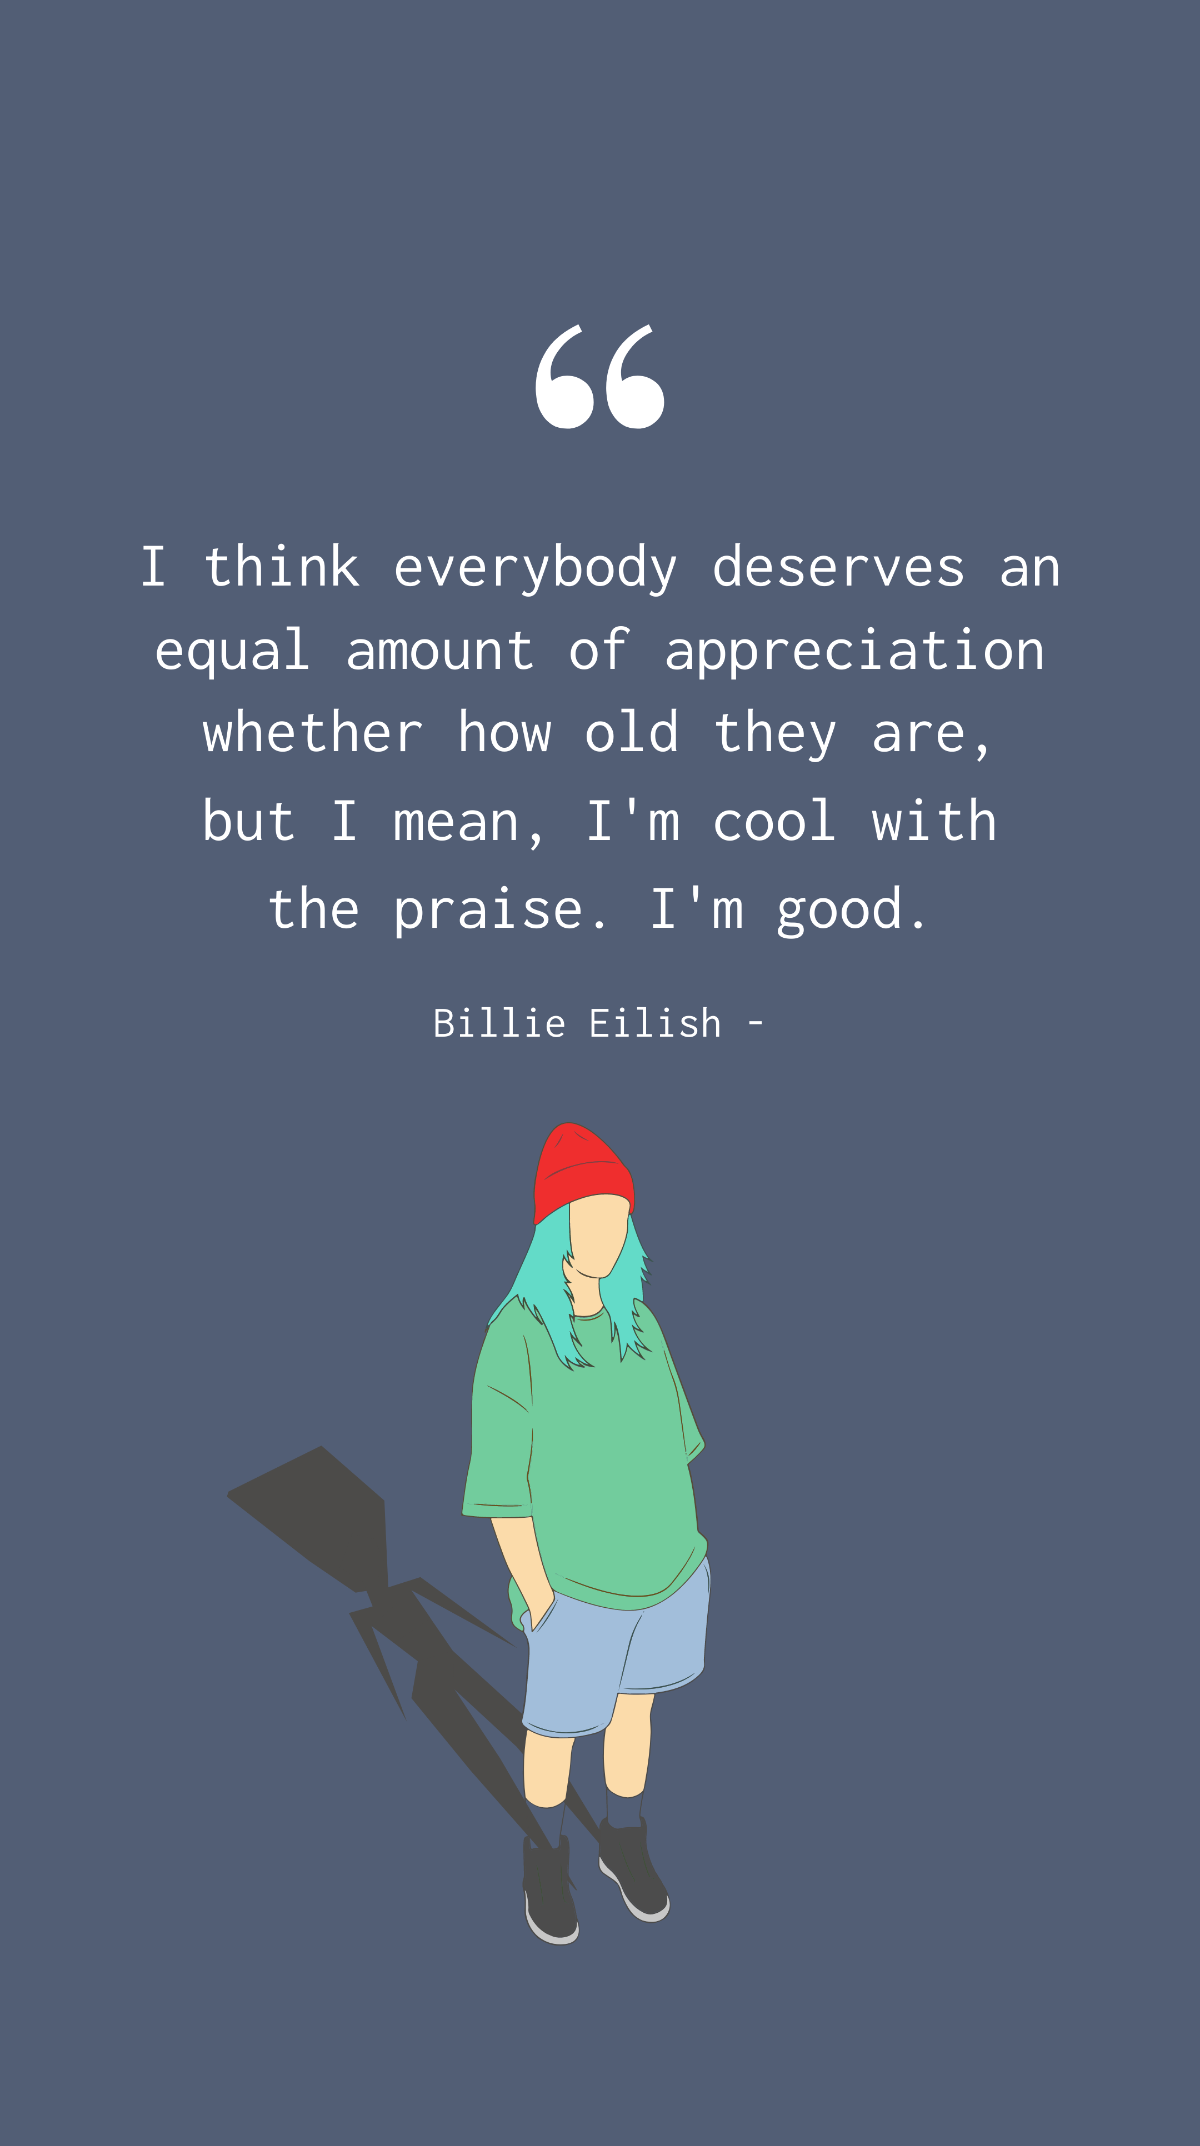 Free Billie Eilish - I think everybody deserves an equal amount of appreciation whether how old they are, but I mean, I'm cool with the praise. I'm good. Template